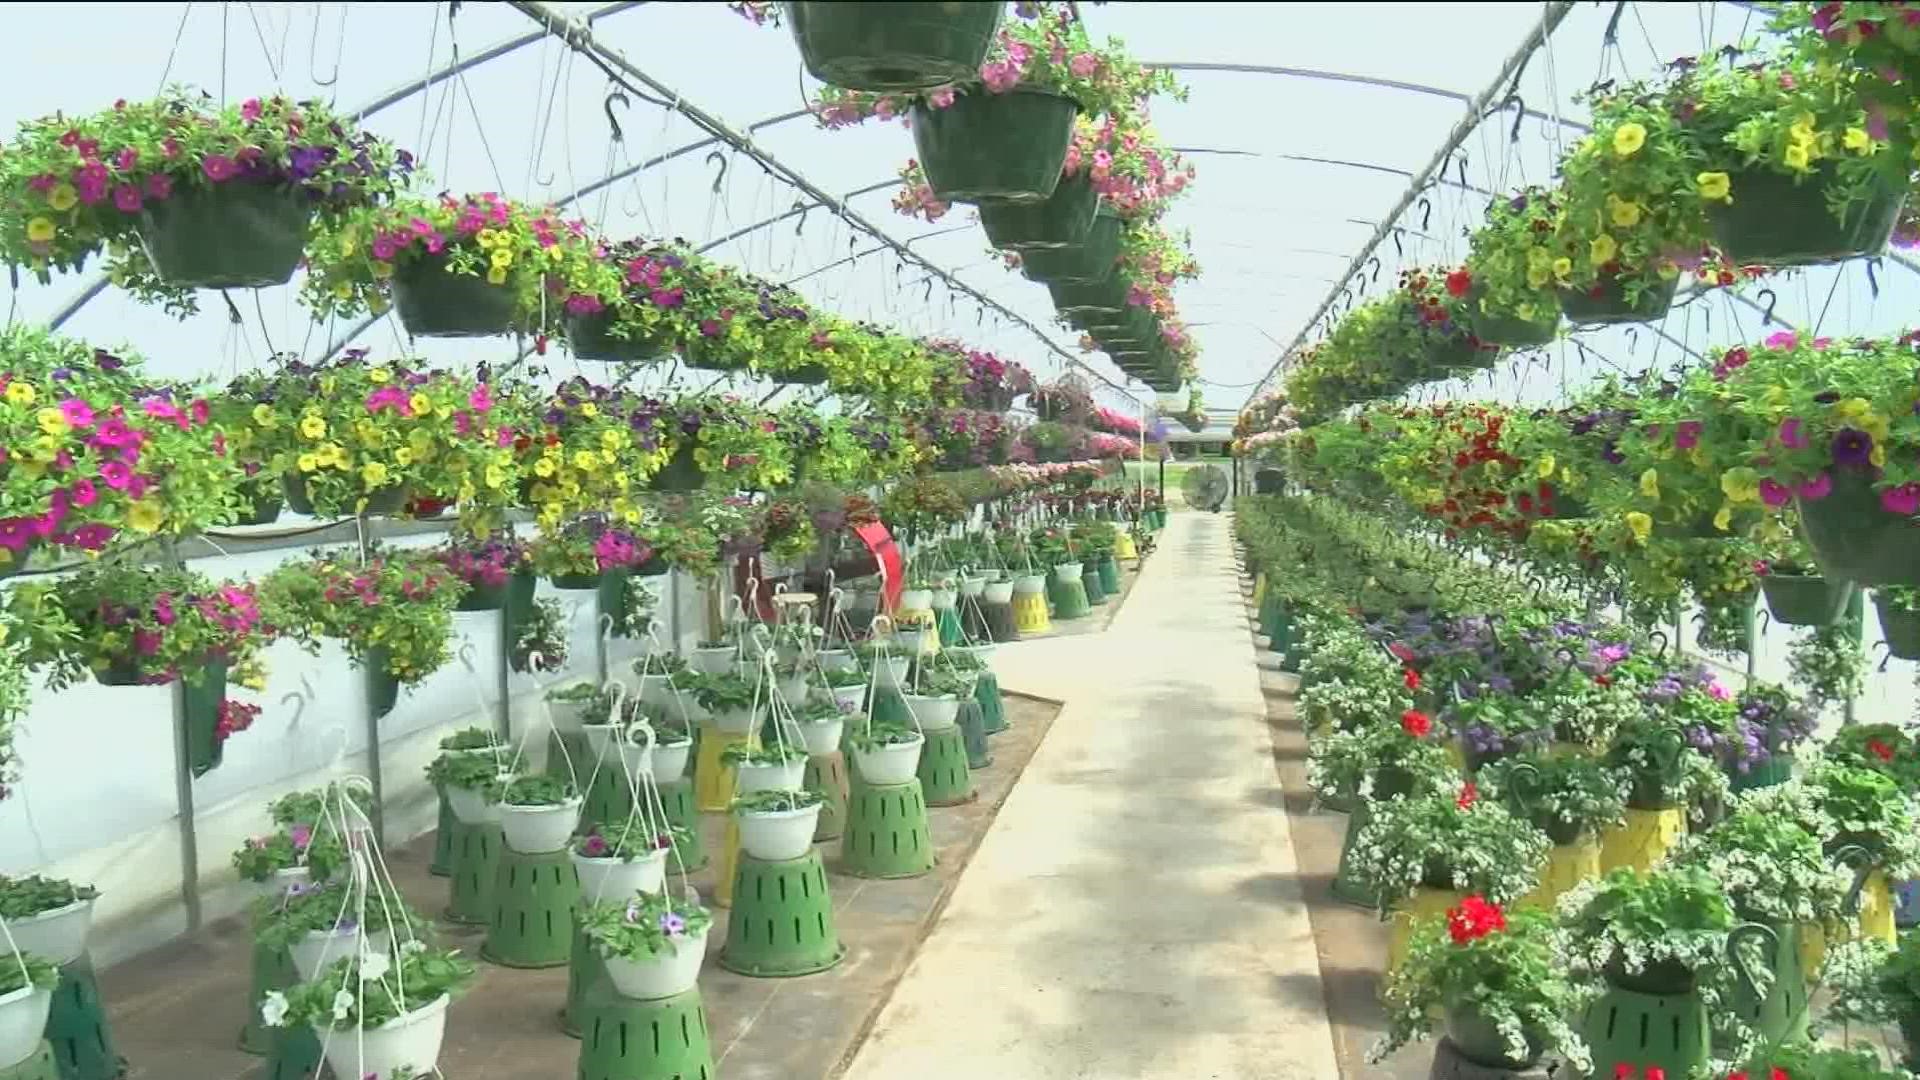 The recent warm weather allowed the greenhouse to open its doors the public sooner than expected. People can visit Stevens Garden starting Saturday.